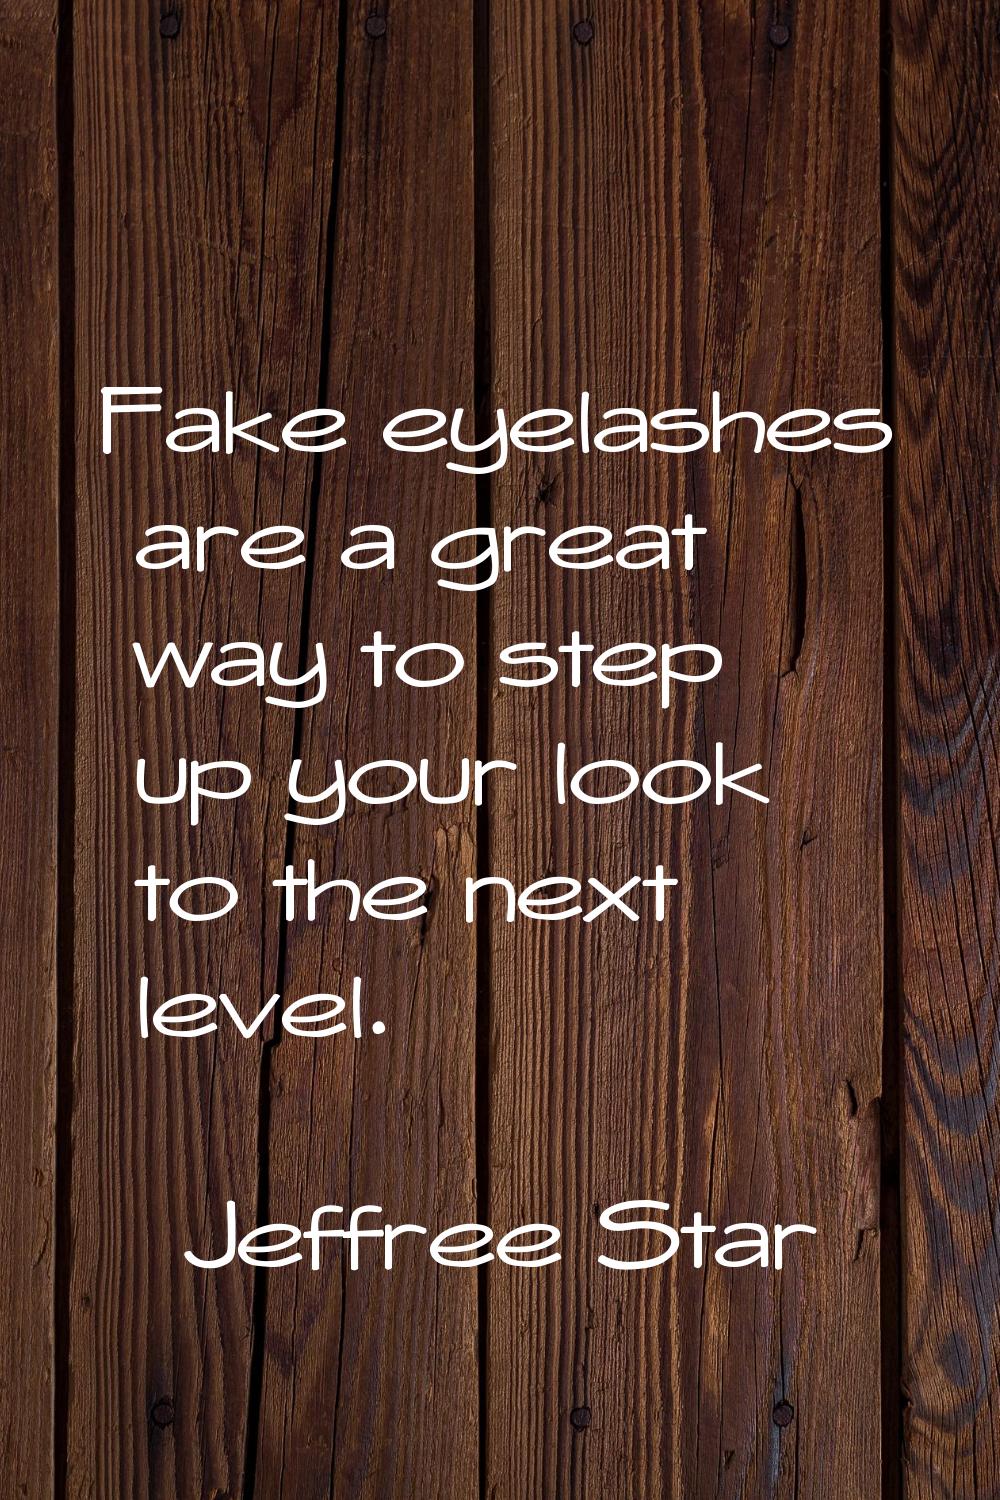 Fake eyelashes are a great way to step up your look to the next level.